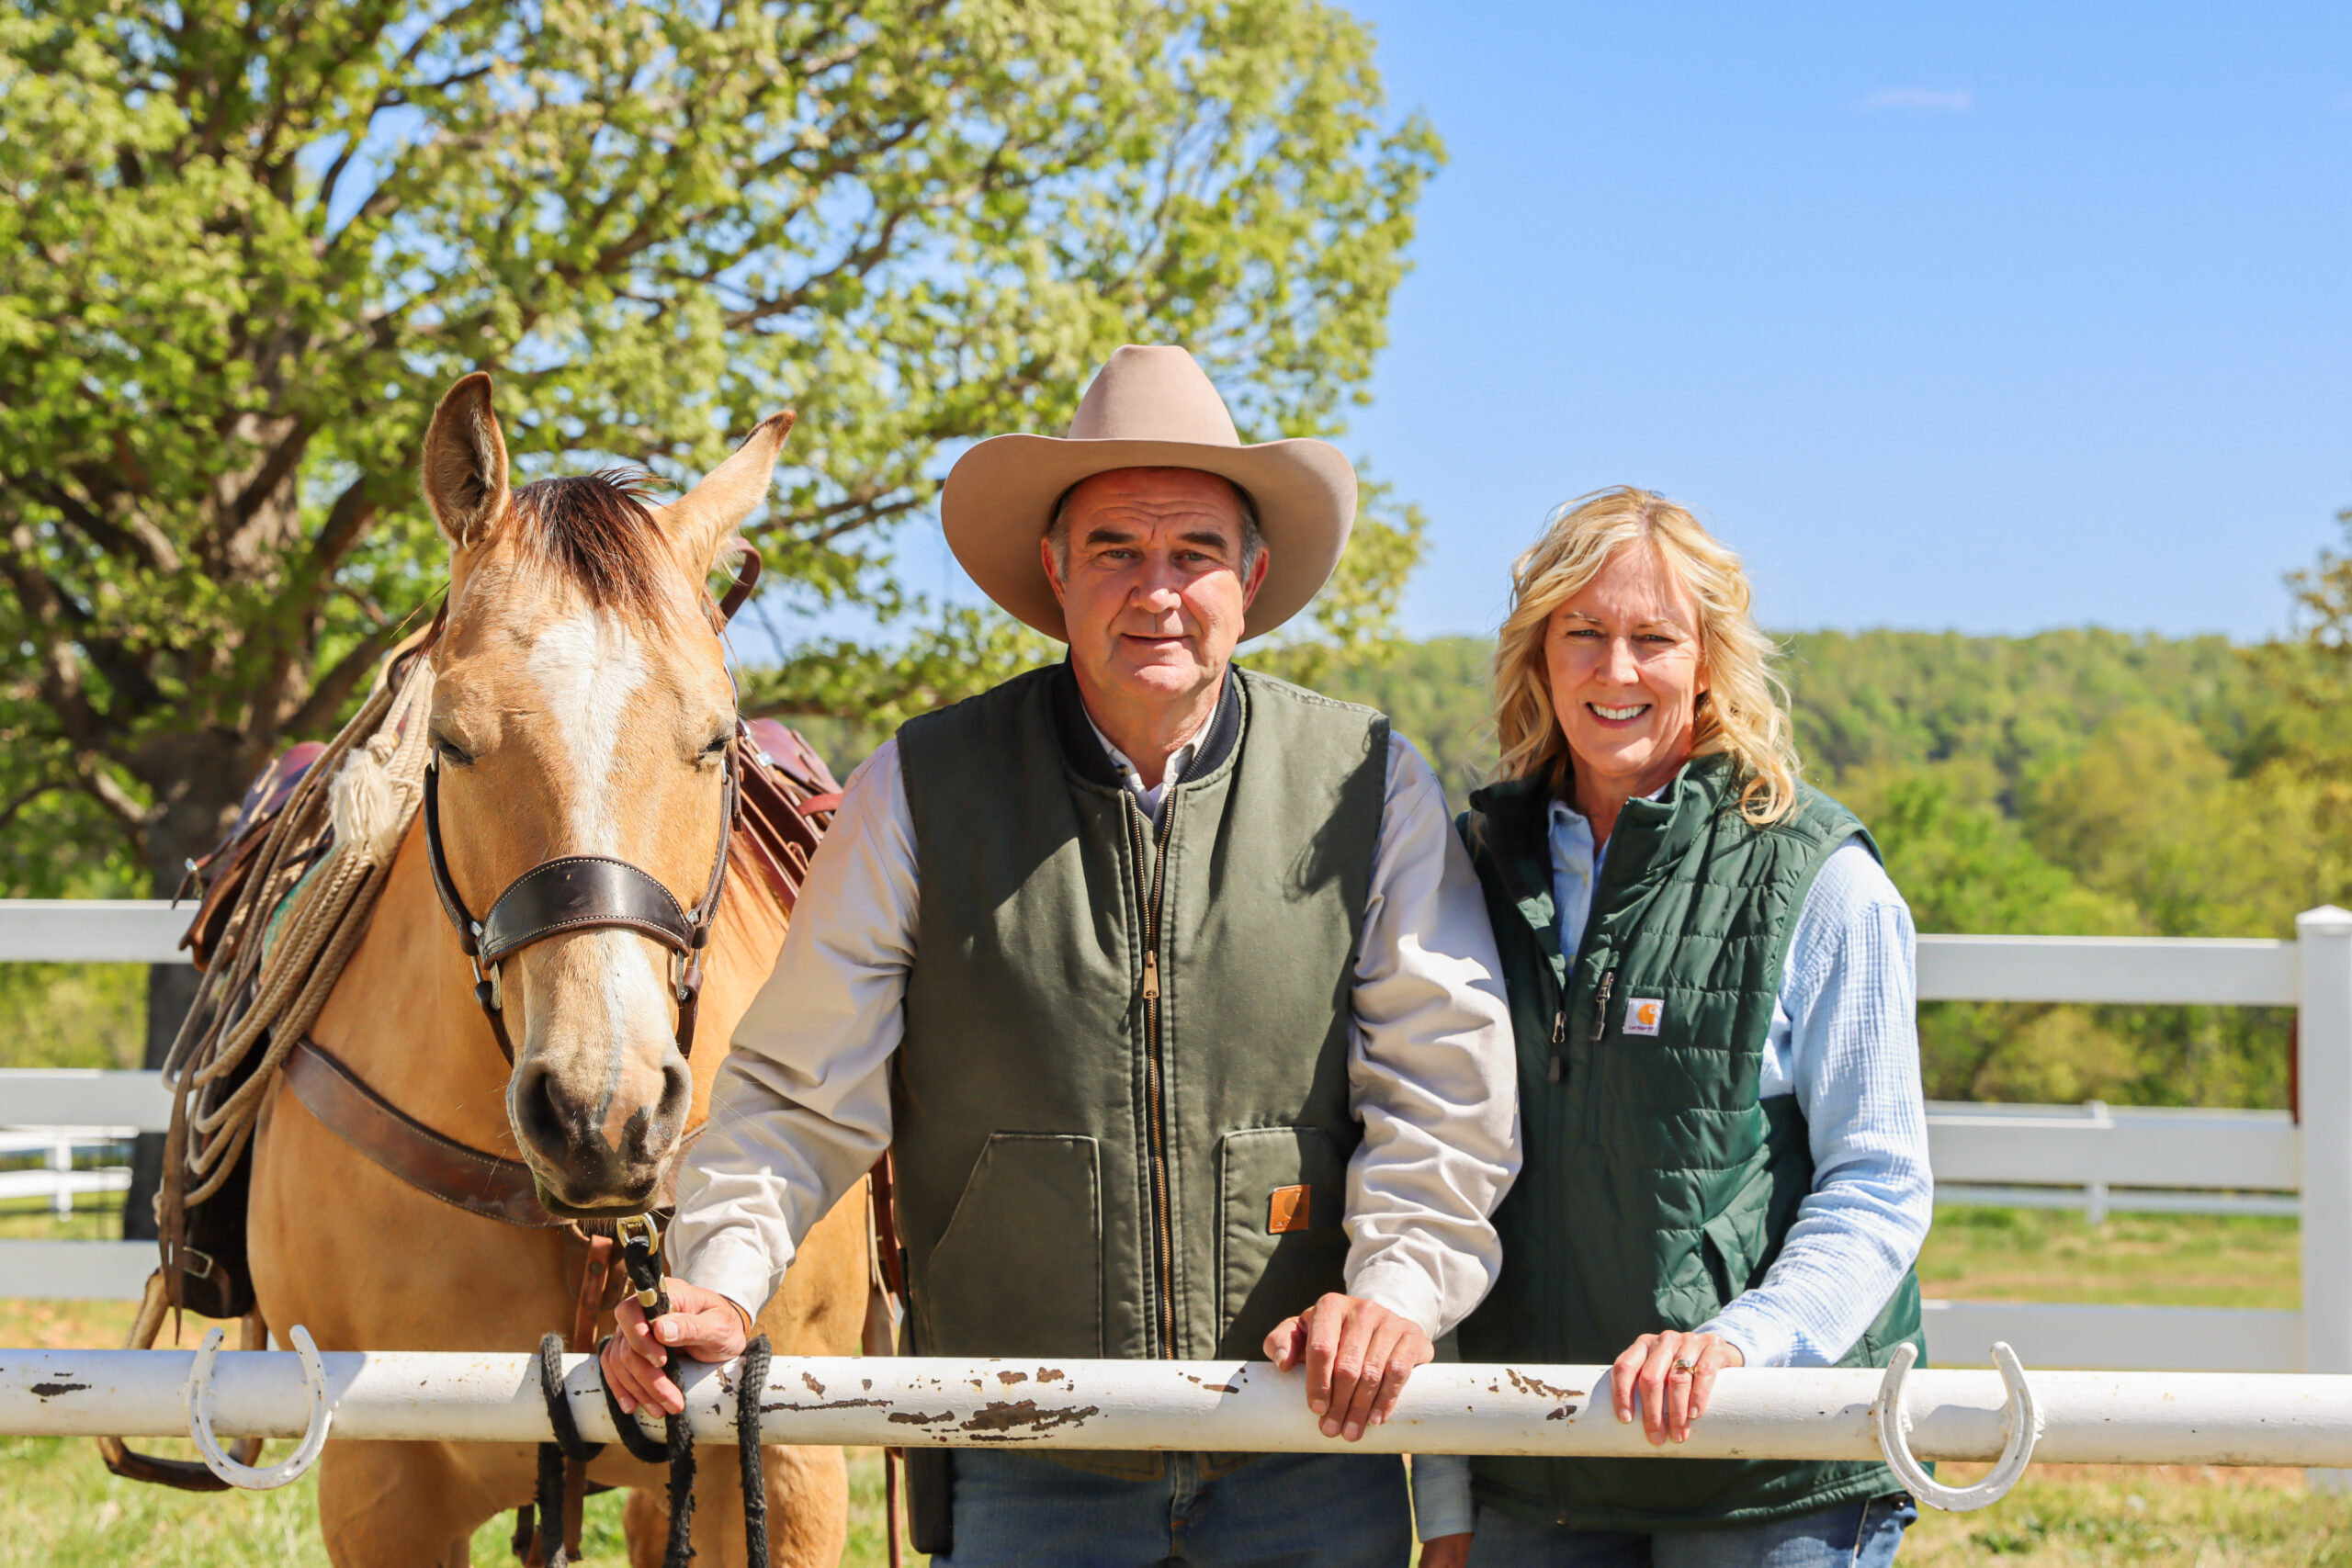 Mike Kehoe, 2024 Governor Candidate, and his wife, Claudia, pose with their horse.